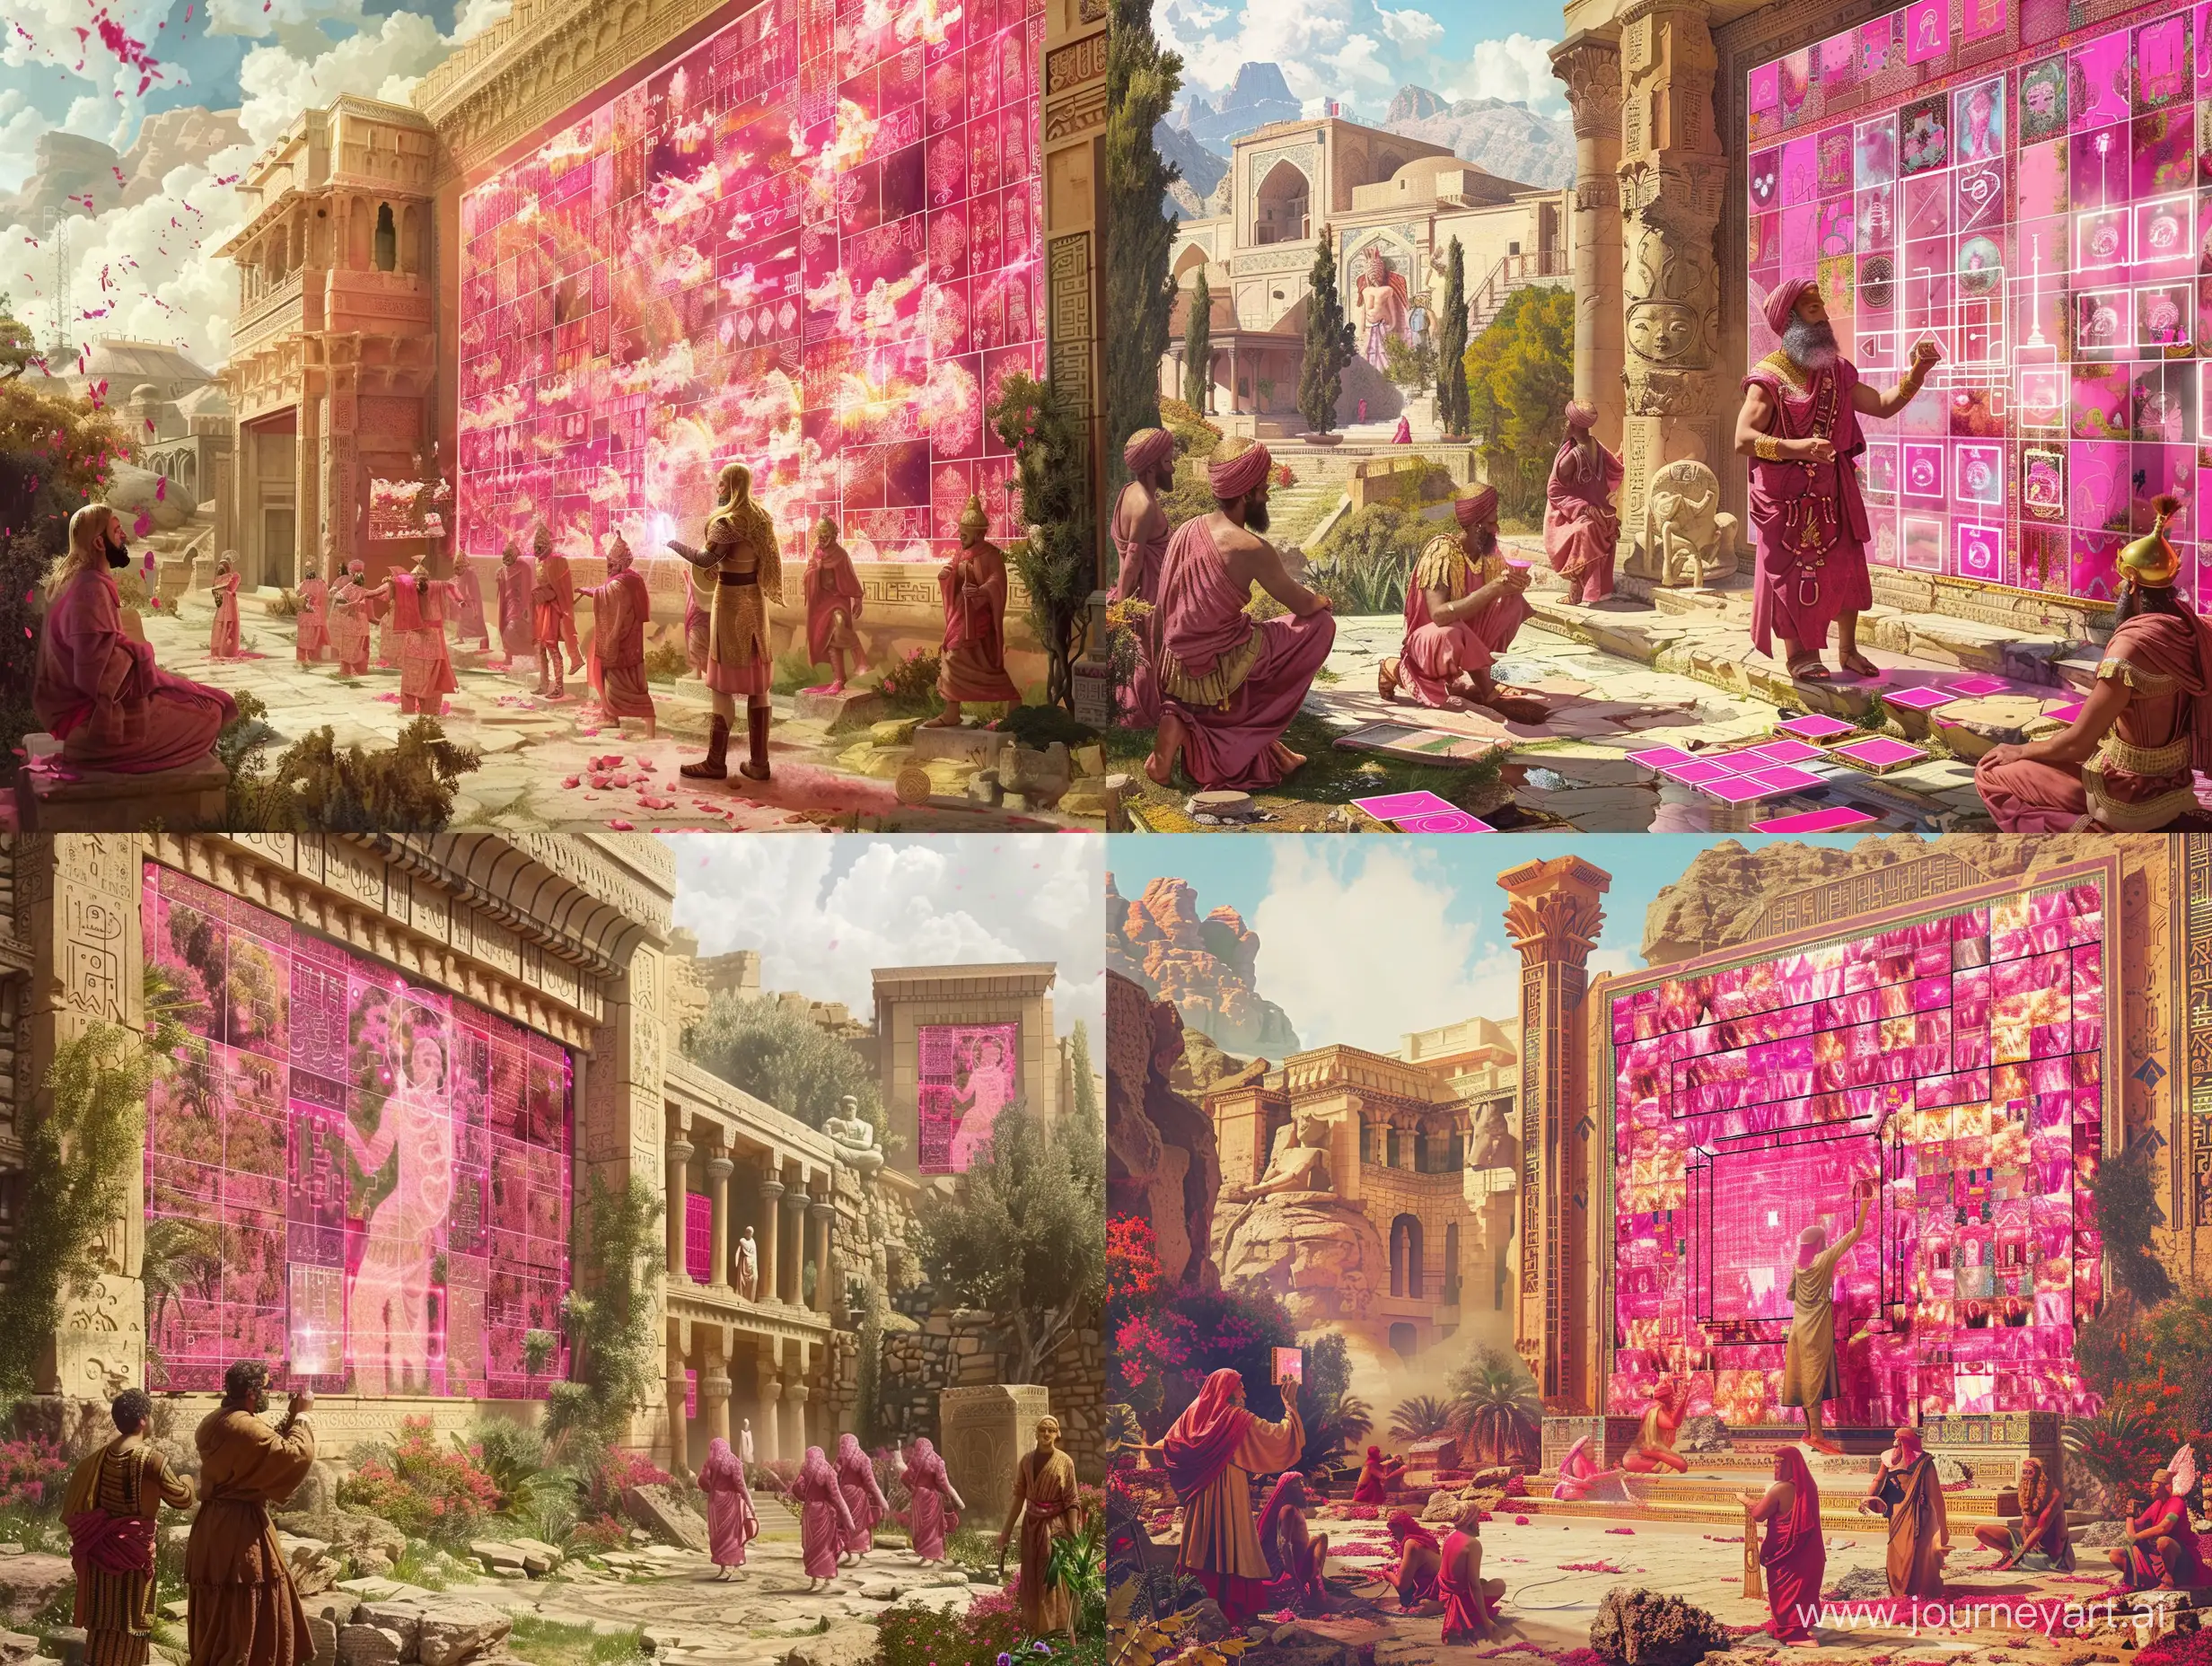 Persian-Magician-Unveils-Divine-Creations-in-Pinkthemed-Ancient-Wall-Art